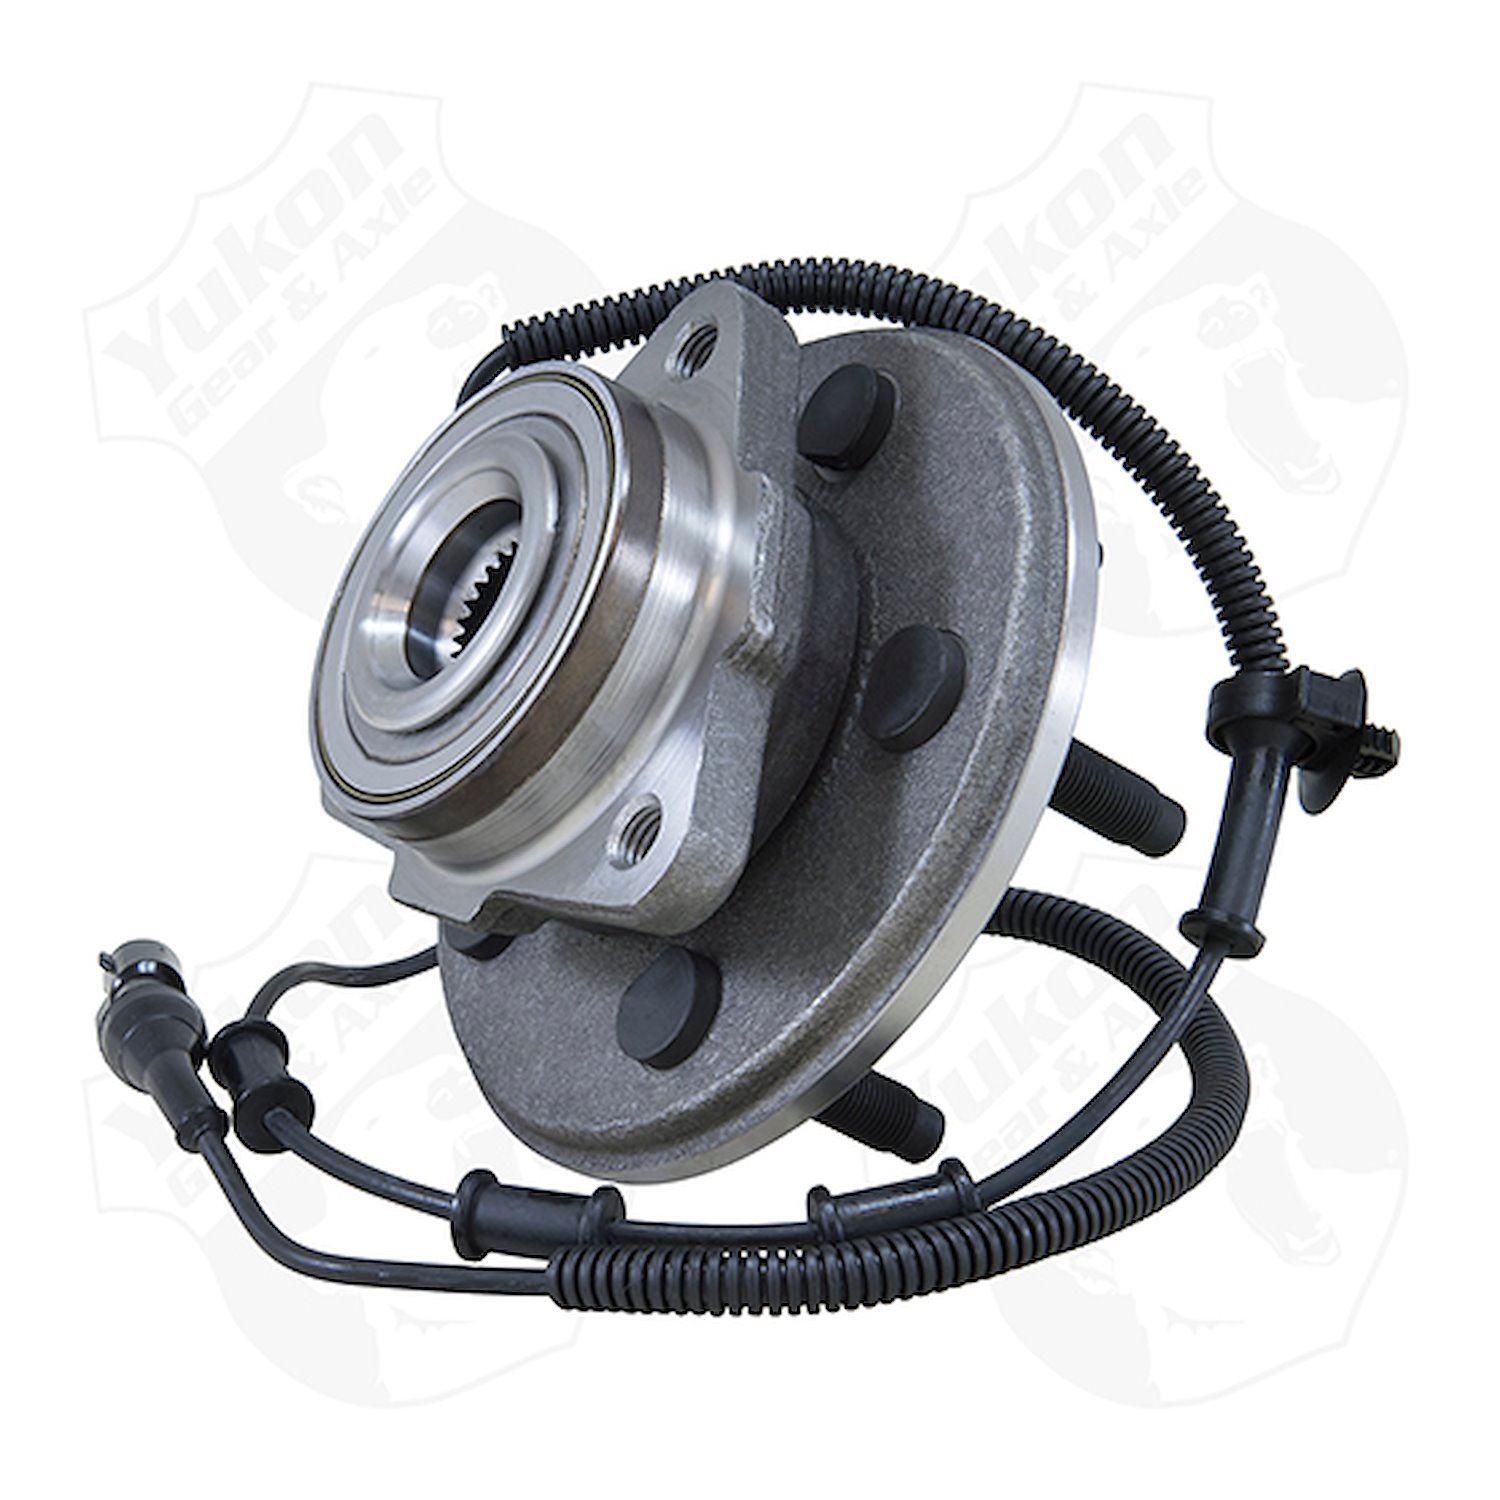 Yukon unit bearing / hub assembly for 02- 06 Ford front with ABS